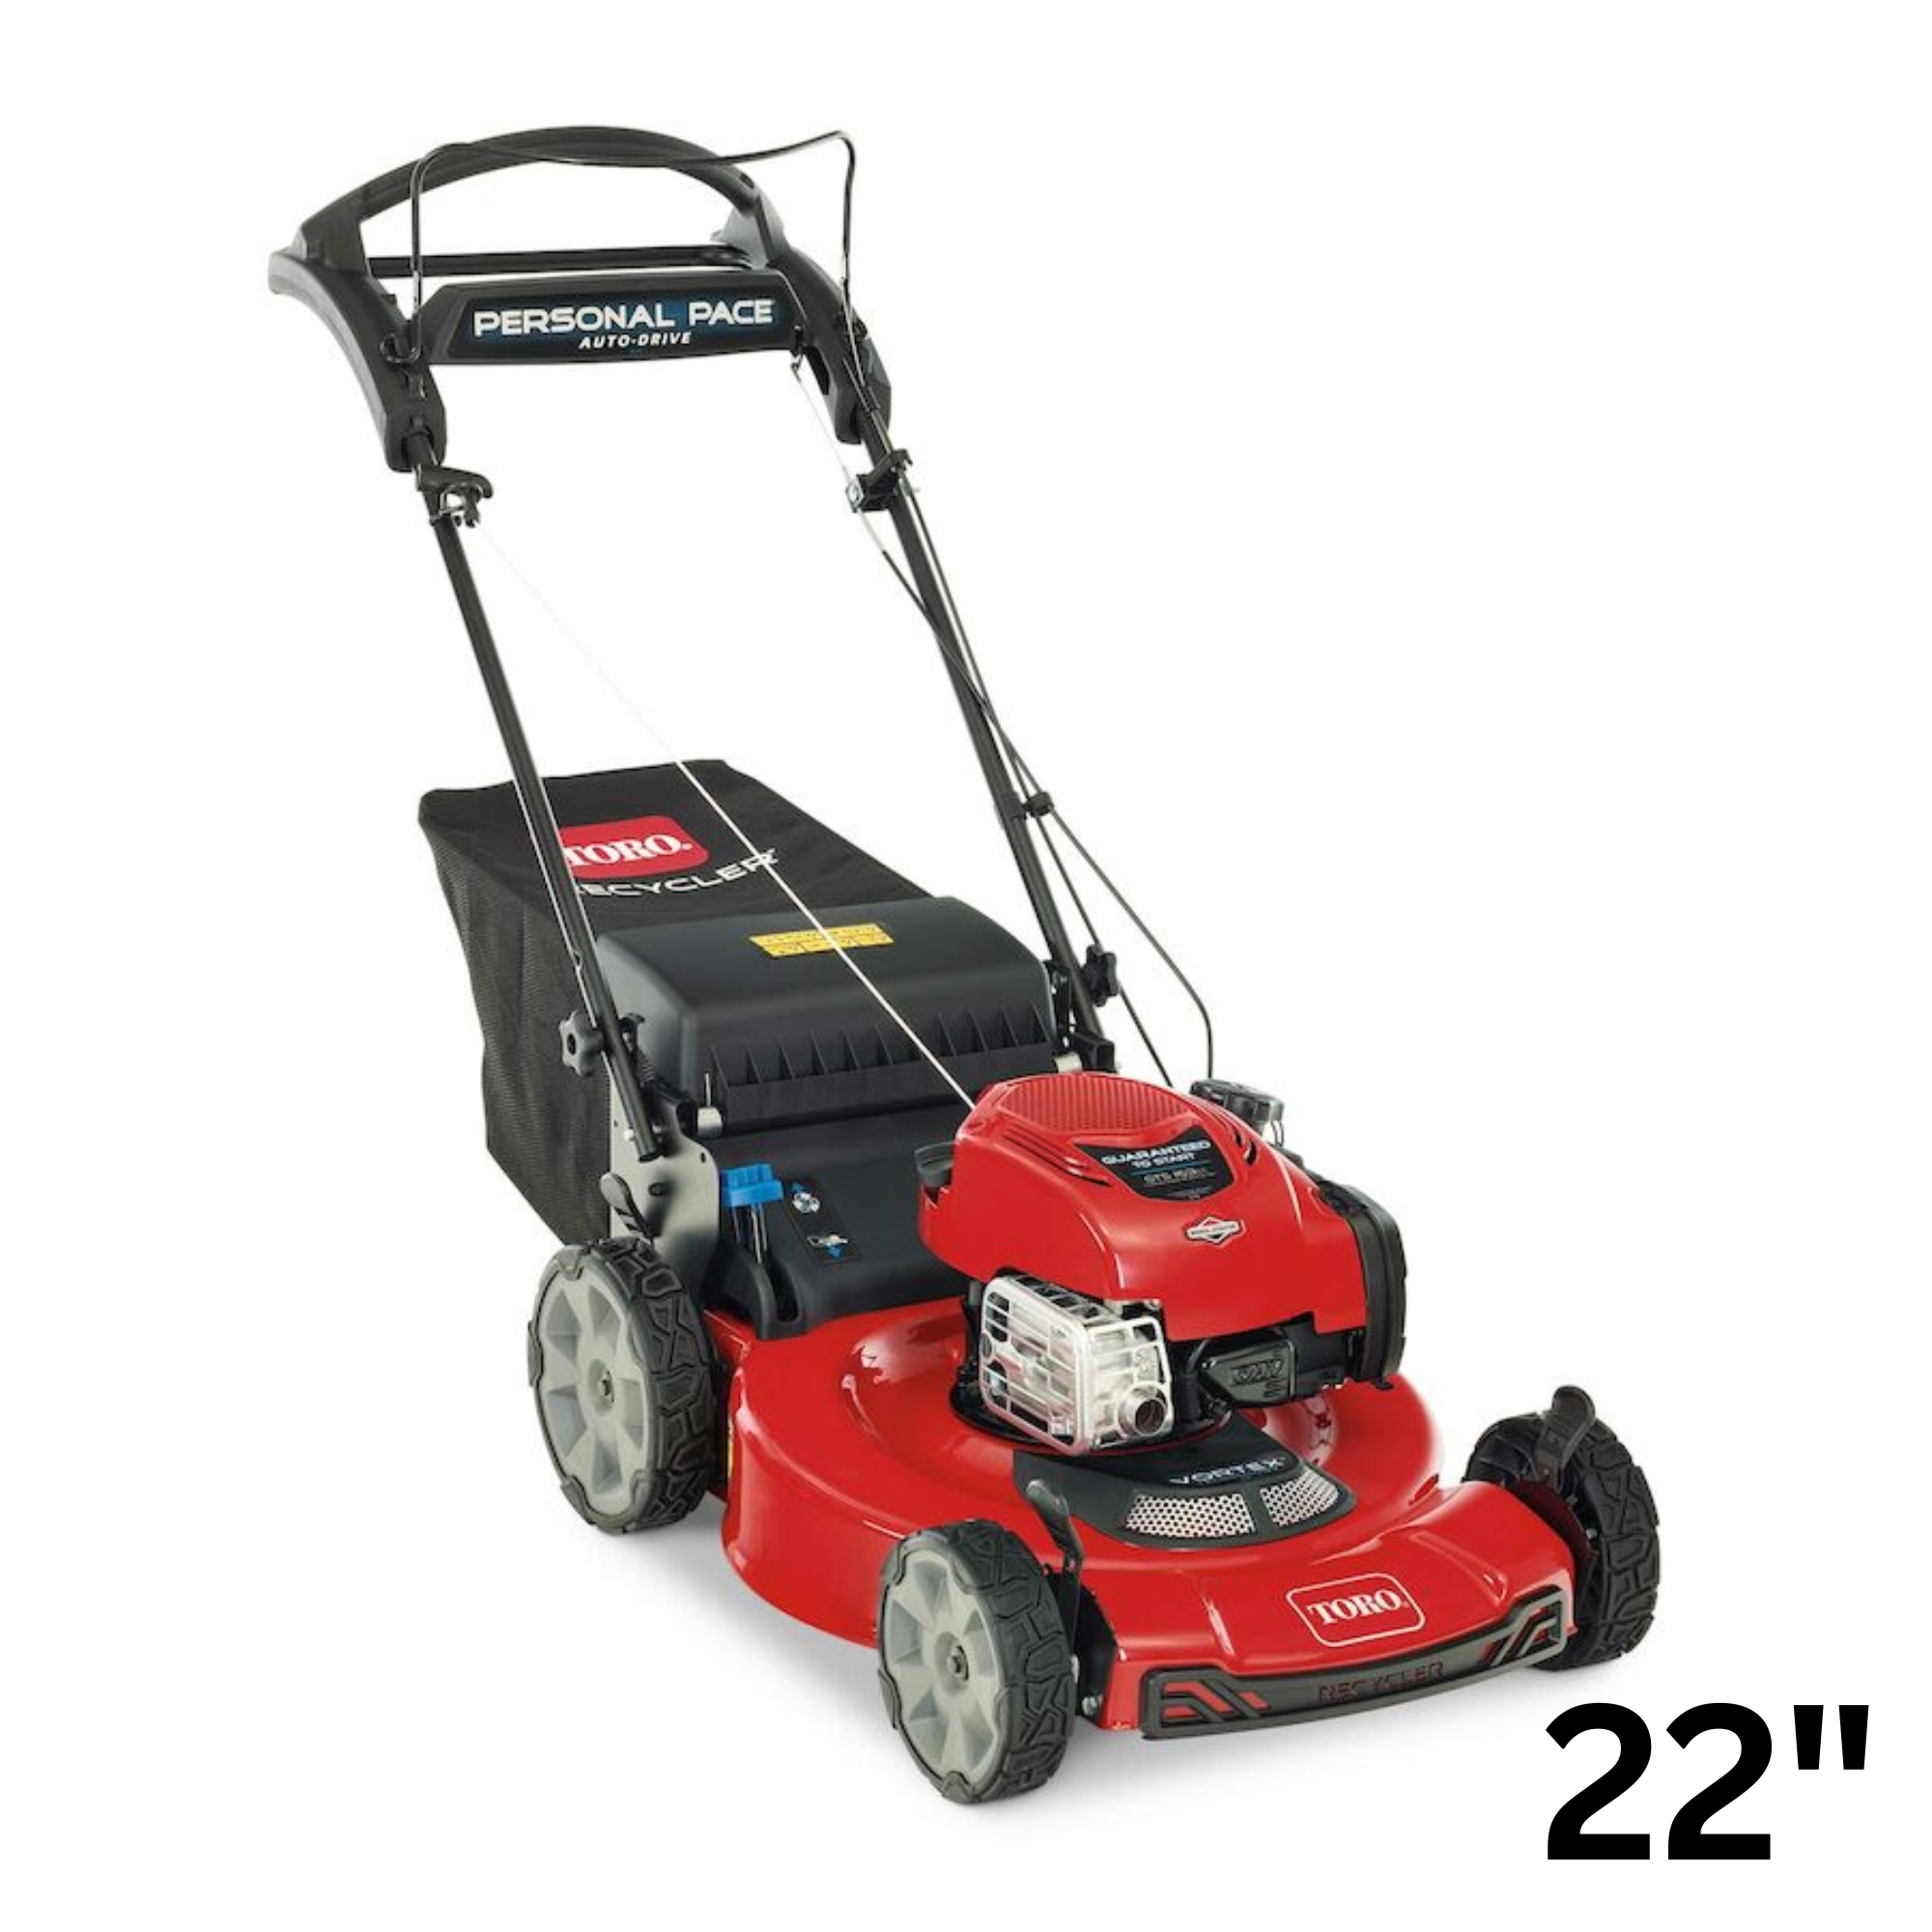 Toro Recycler (22") Personal Pace Auto-Drive Electric Start Mower